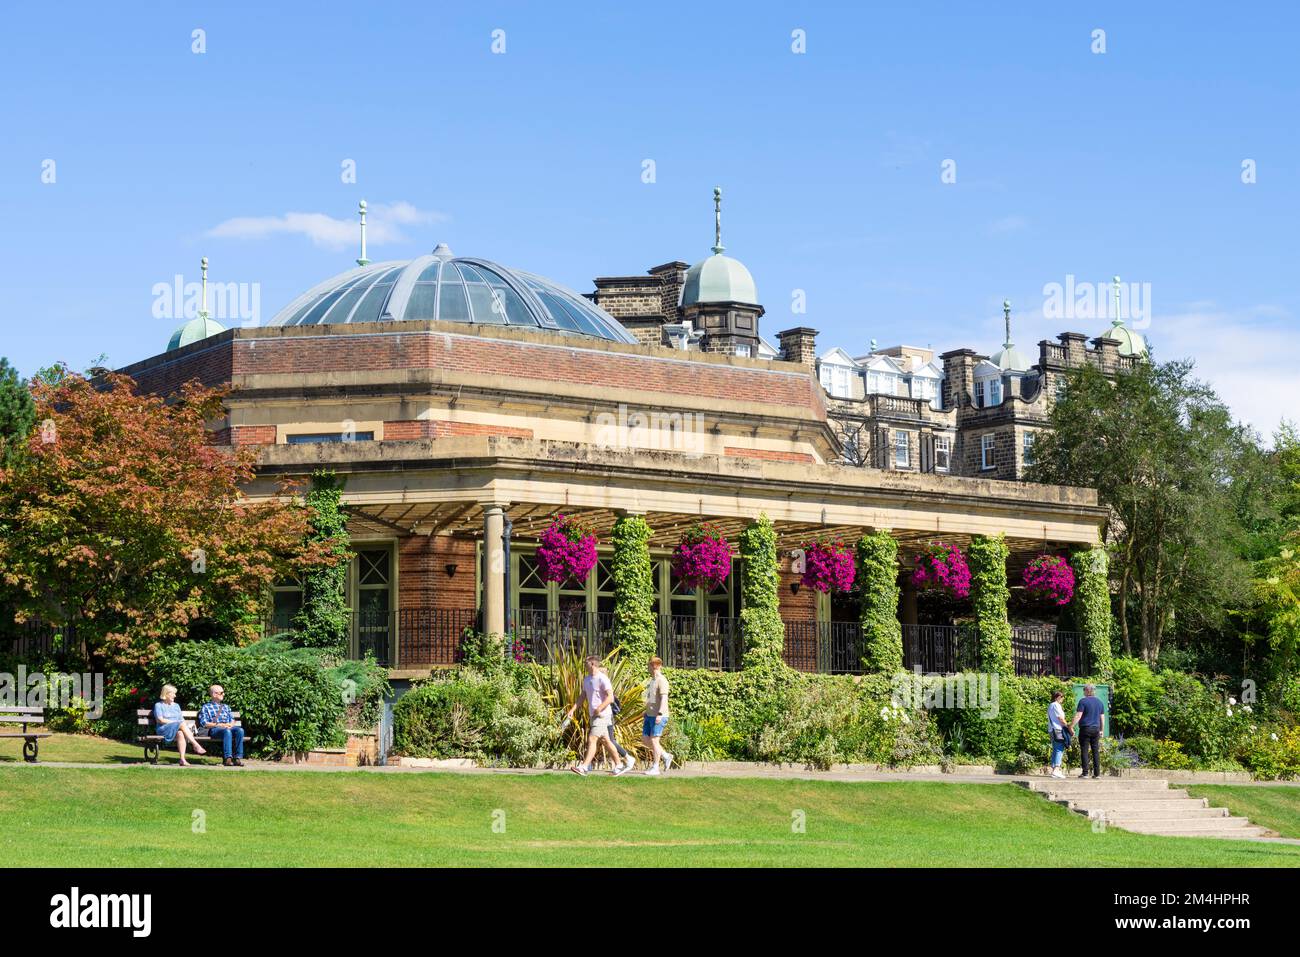 Harrogate Yorkshire The Sun Pavilion and Sun Colonnade in the Grade II listed Valley Gardens Harrogate North Yorkshire England UK GB Europe Stock Photo